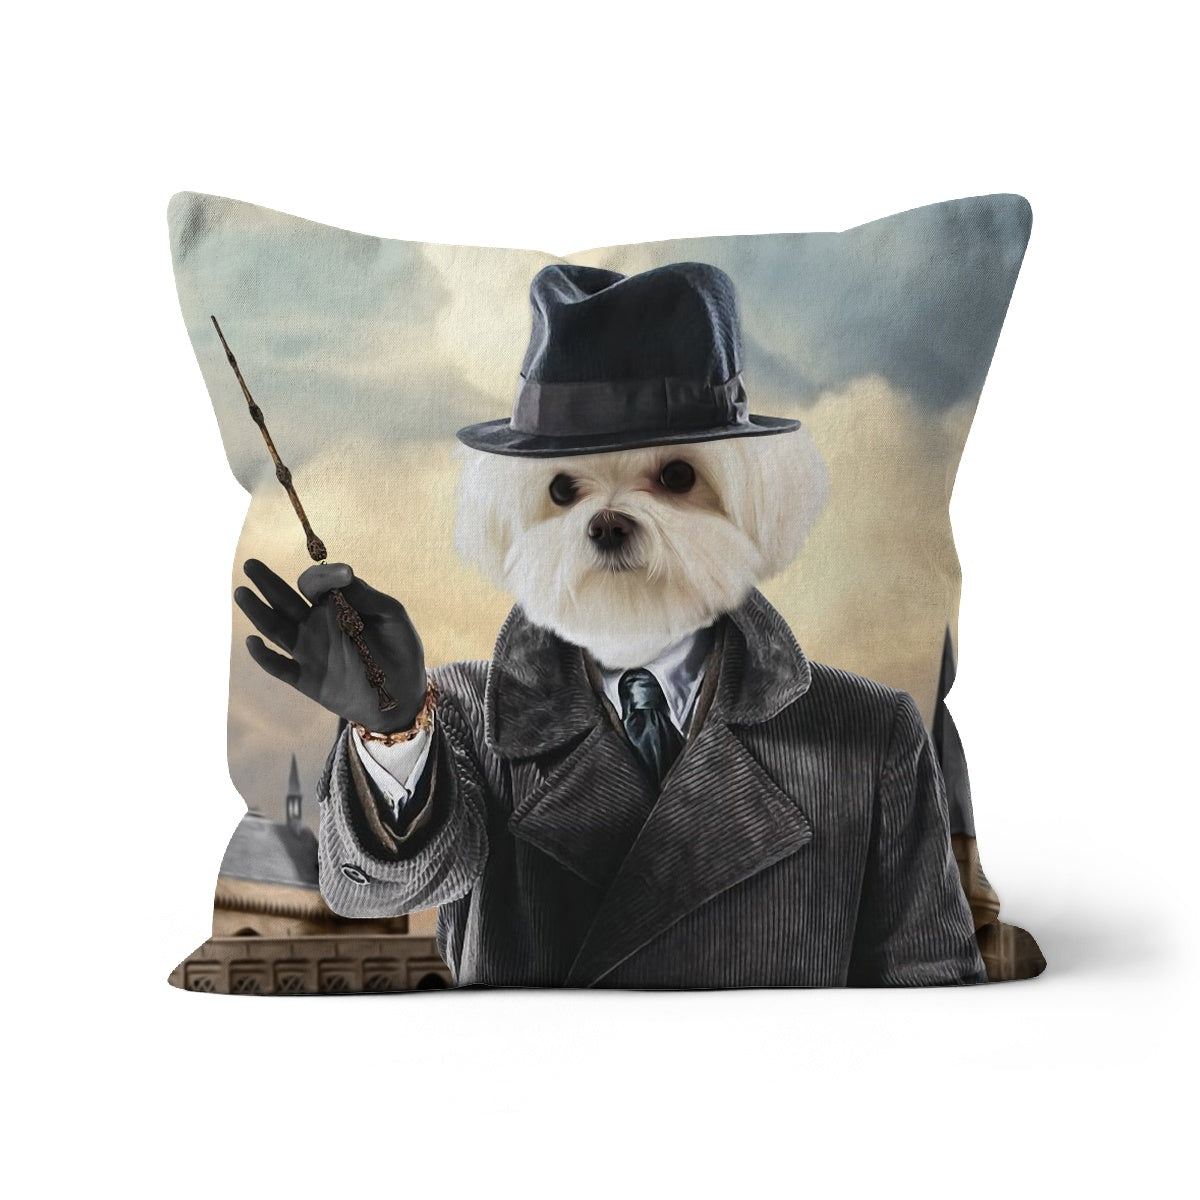 personalised cat pillow, dog shaped pillows, custom pillow cover, pillows with dogs picture, my pet pillow, paw and glory, pawandglory